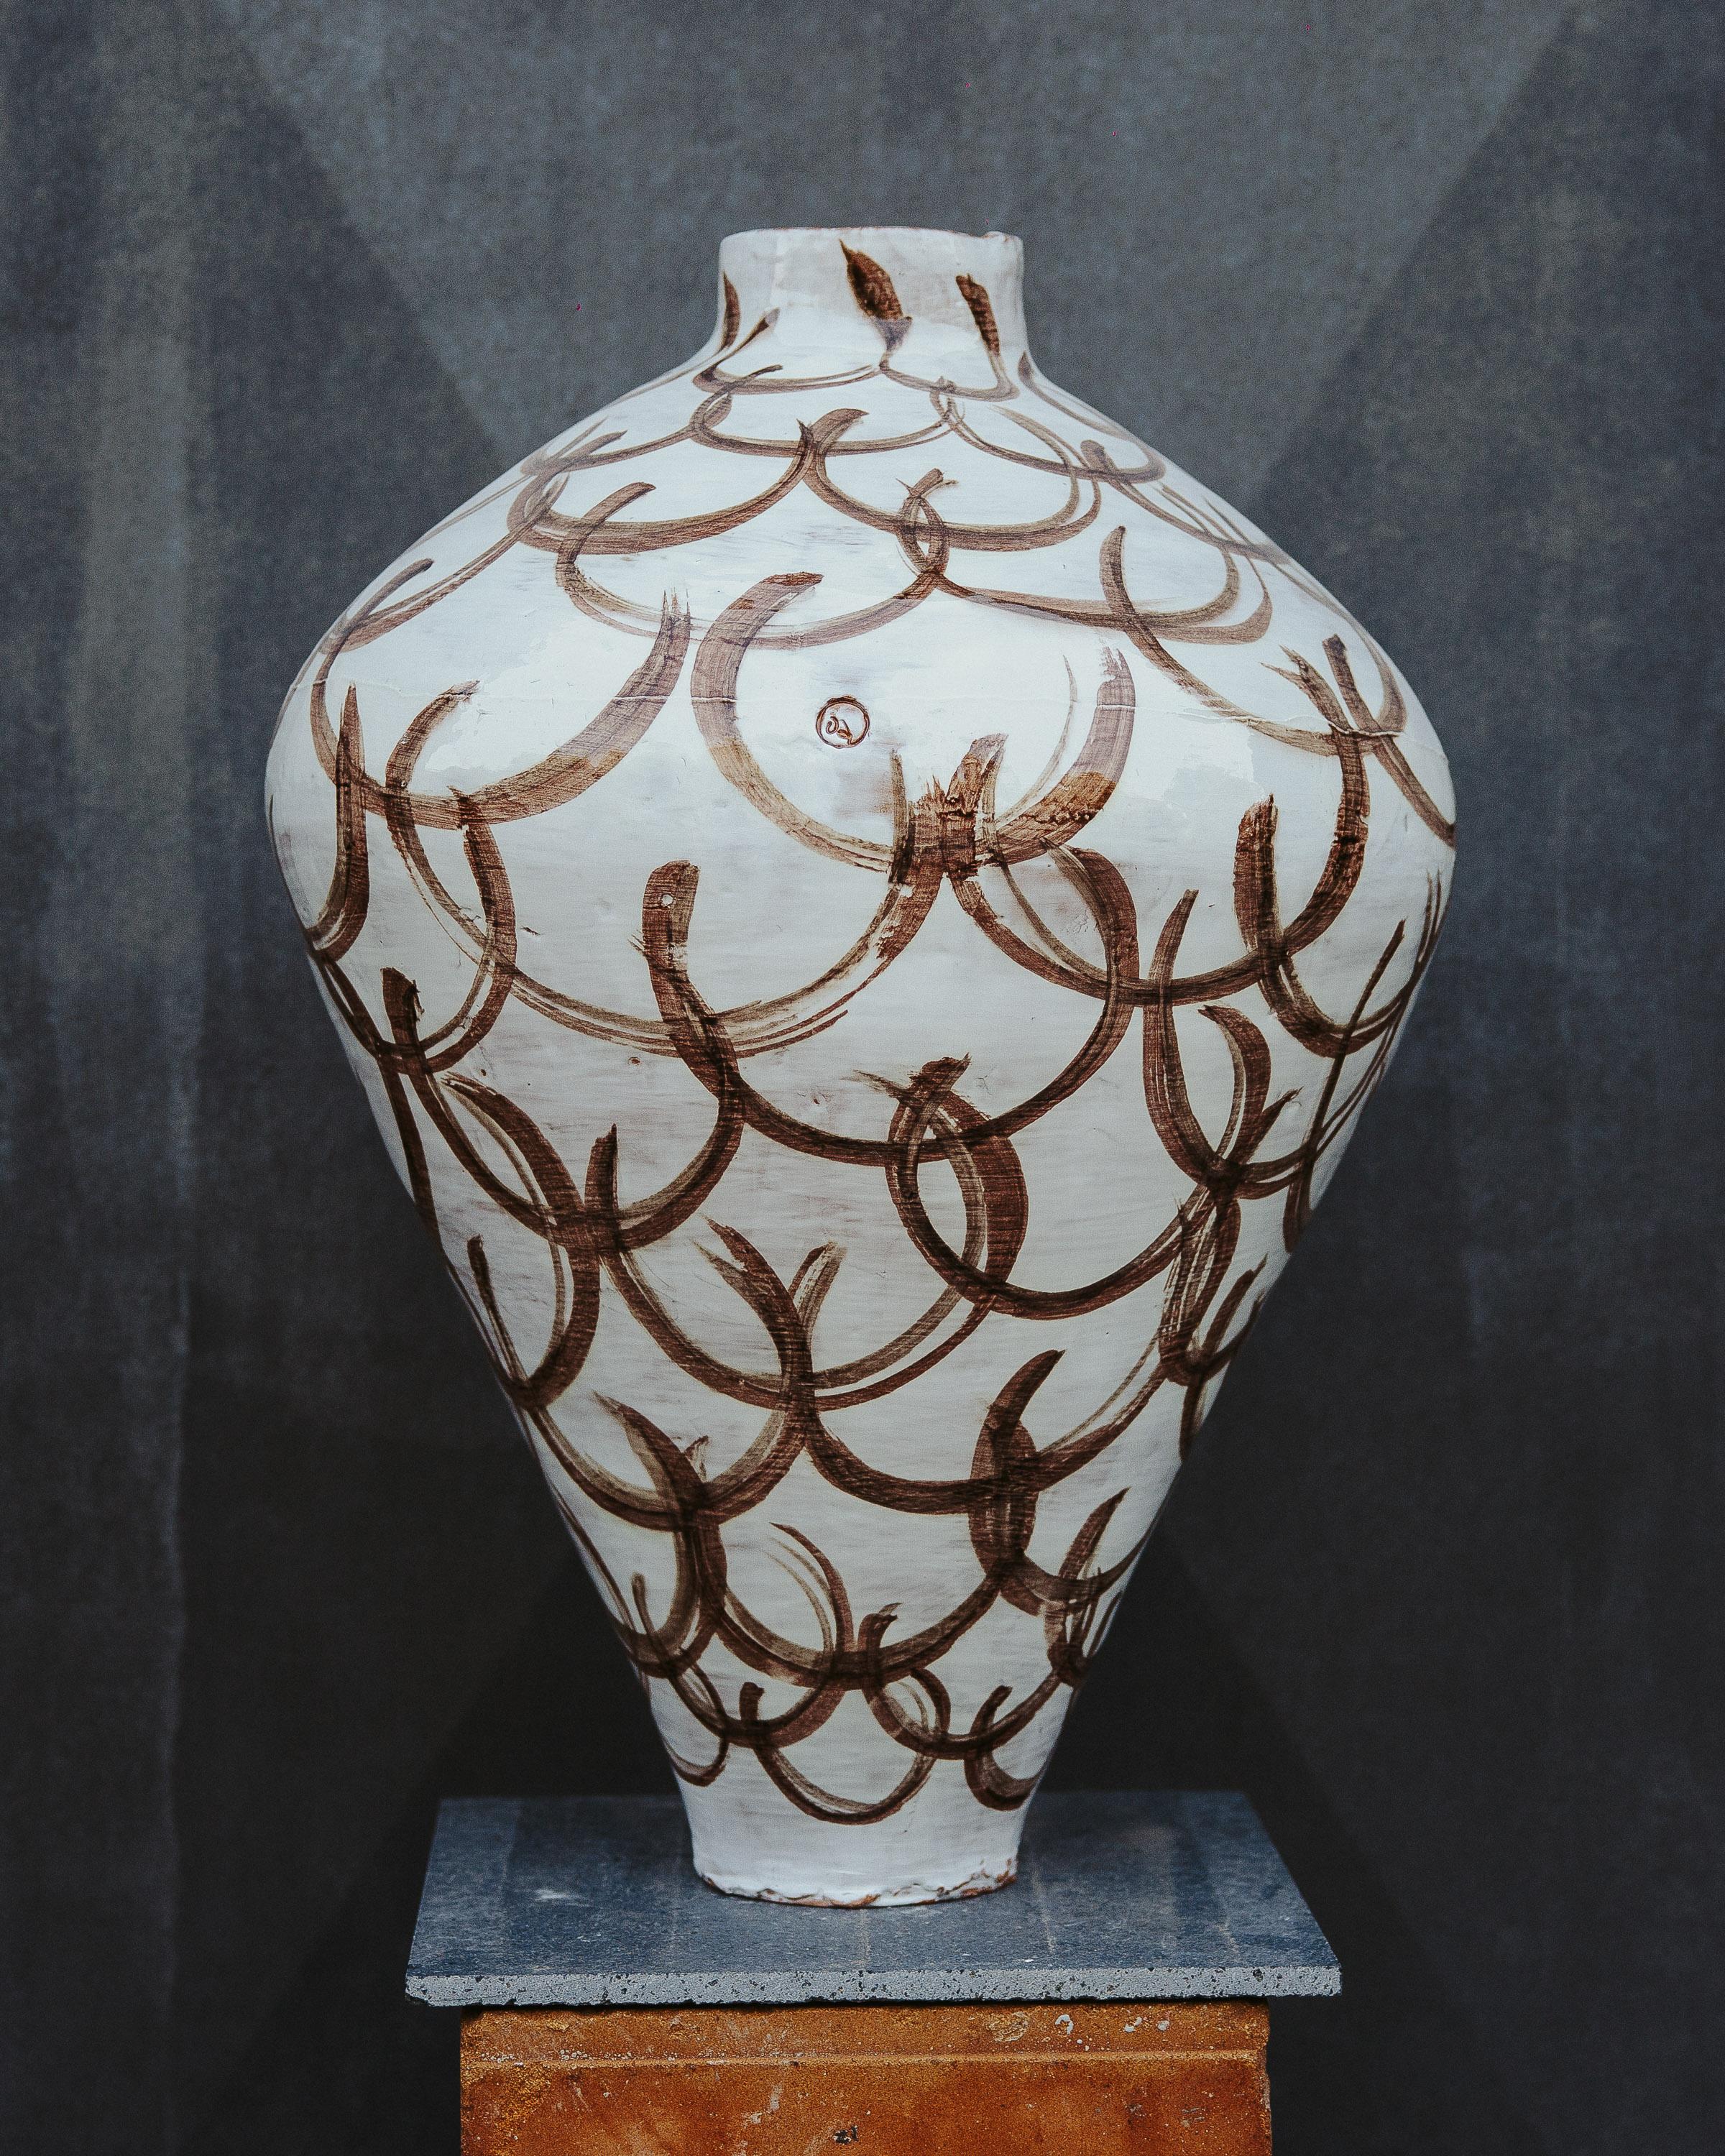 Large ceramic vase by Onofrio Acone, 203 glazed erathenware (majolica) unique piece hand-built and hand-painted  38 cm width  58 cm height

Onofrio Acone is a ceramic artists  based in the Amalfi Coast in the South of Italy. Onofrio creates